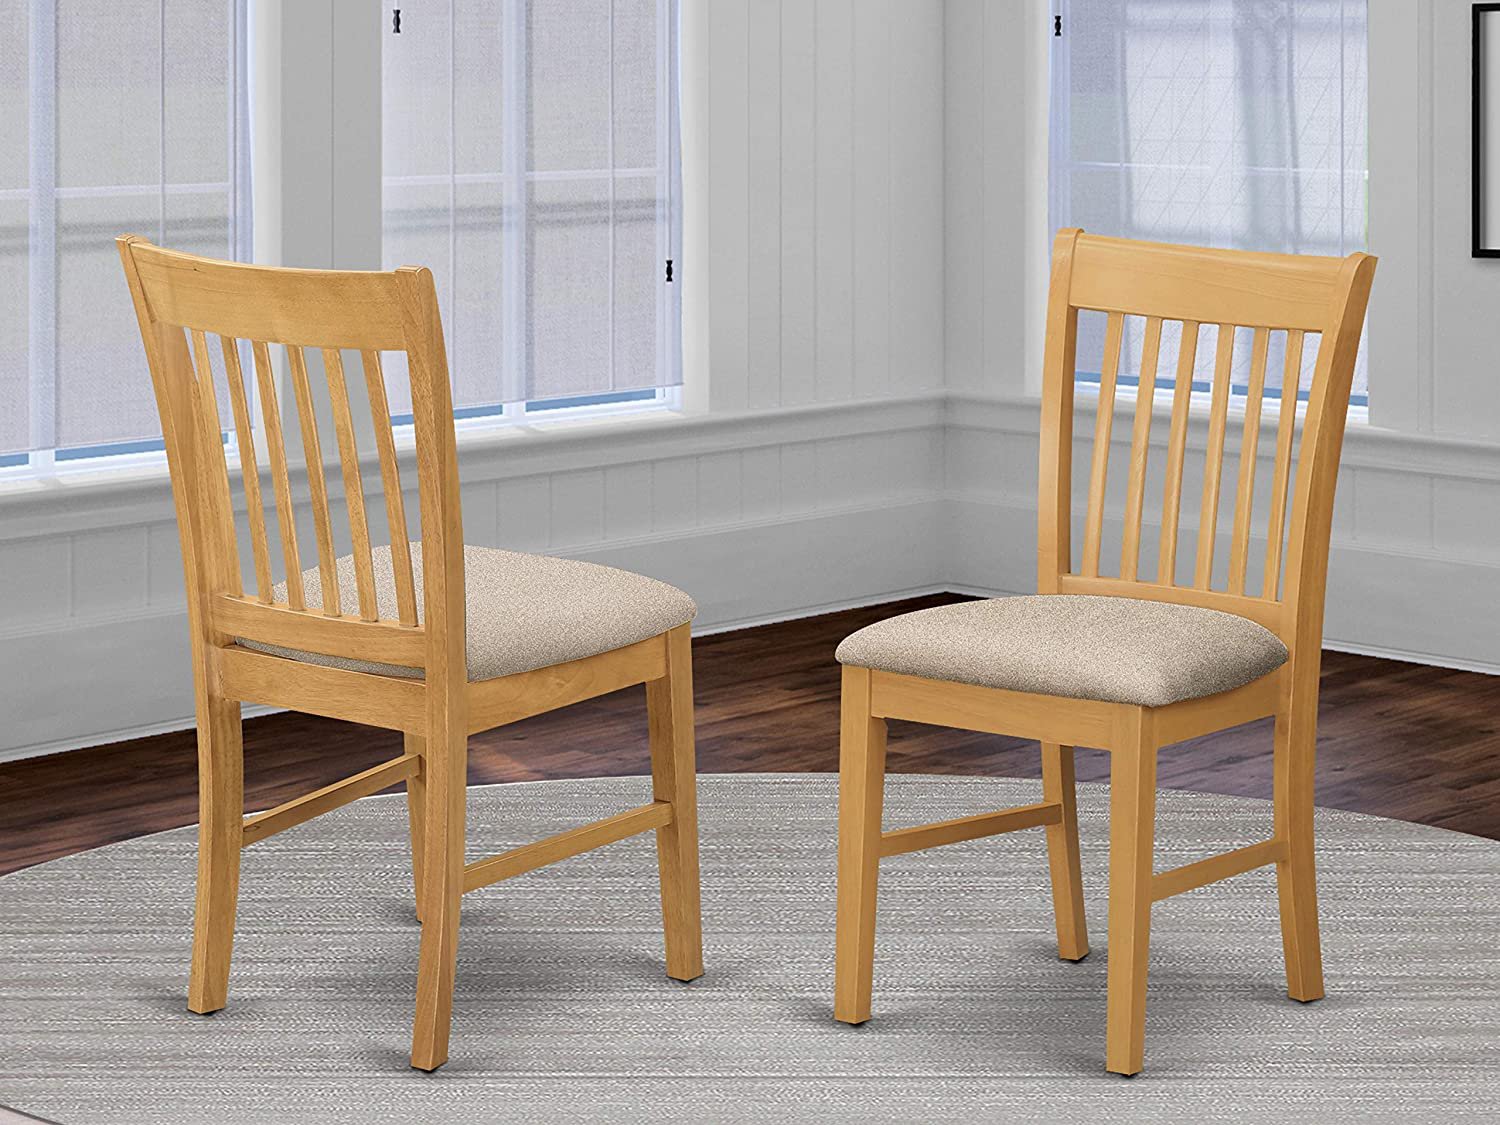 padded oak chair for kitchen table